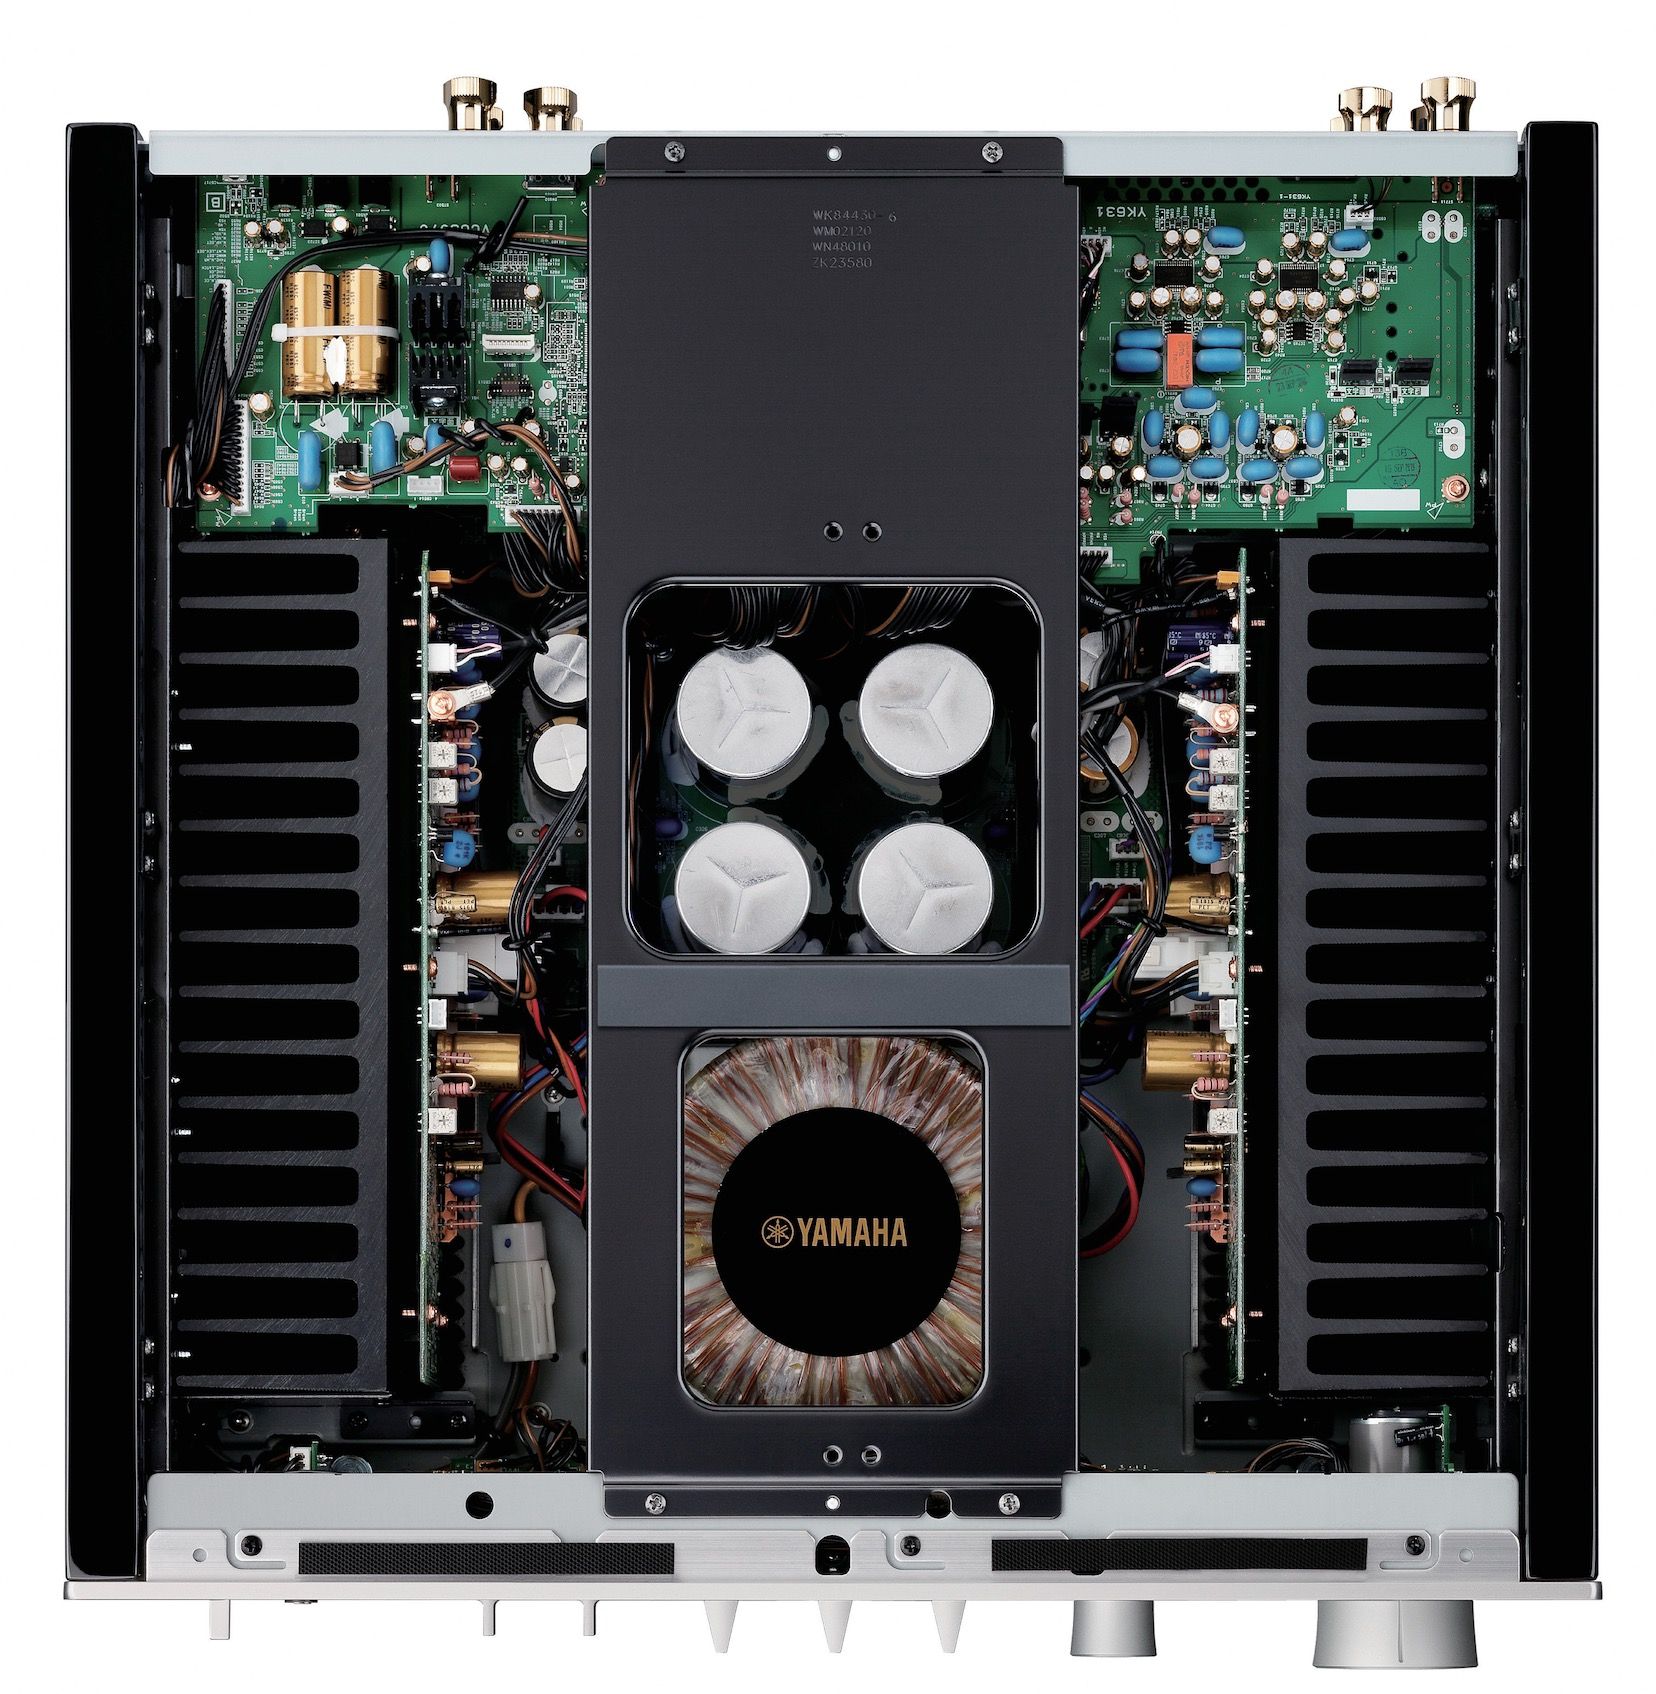 A-S1200 Integrated Amplifier From Yamaha